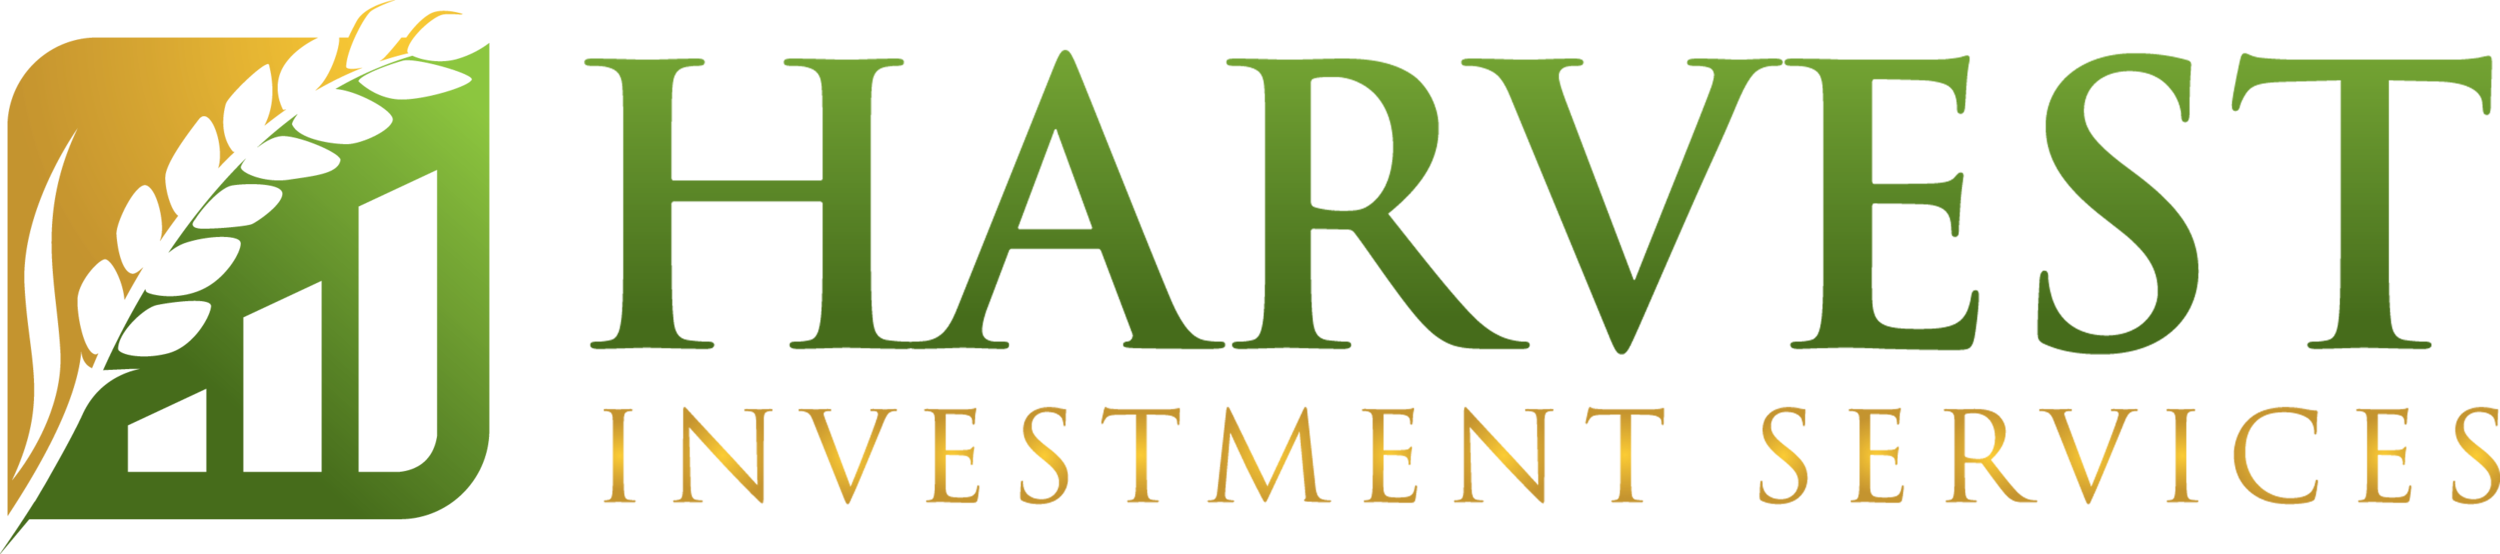 Harvest-Investment-Services-Logo-Without-Little-Words.png